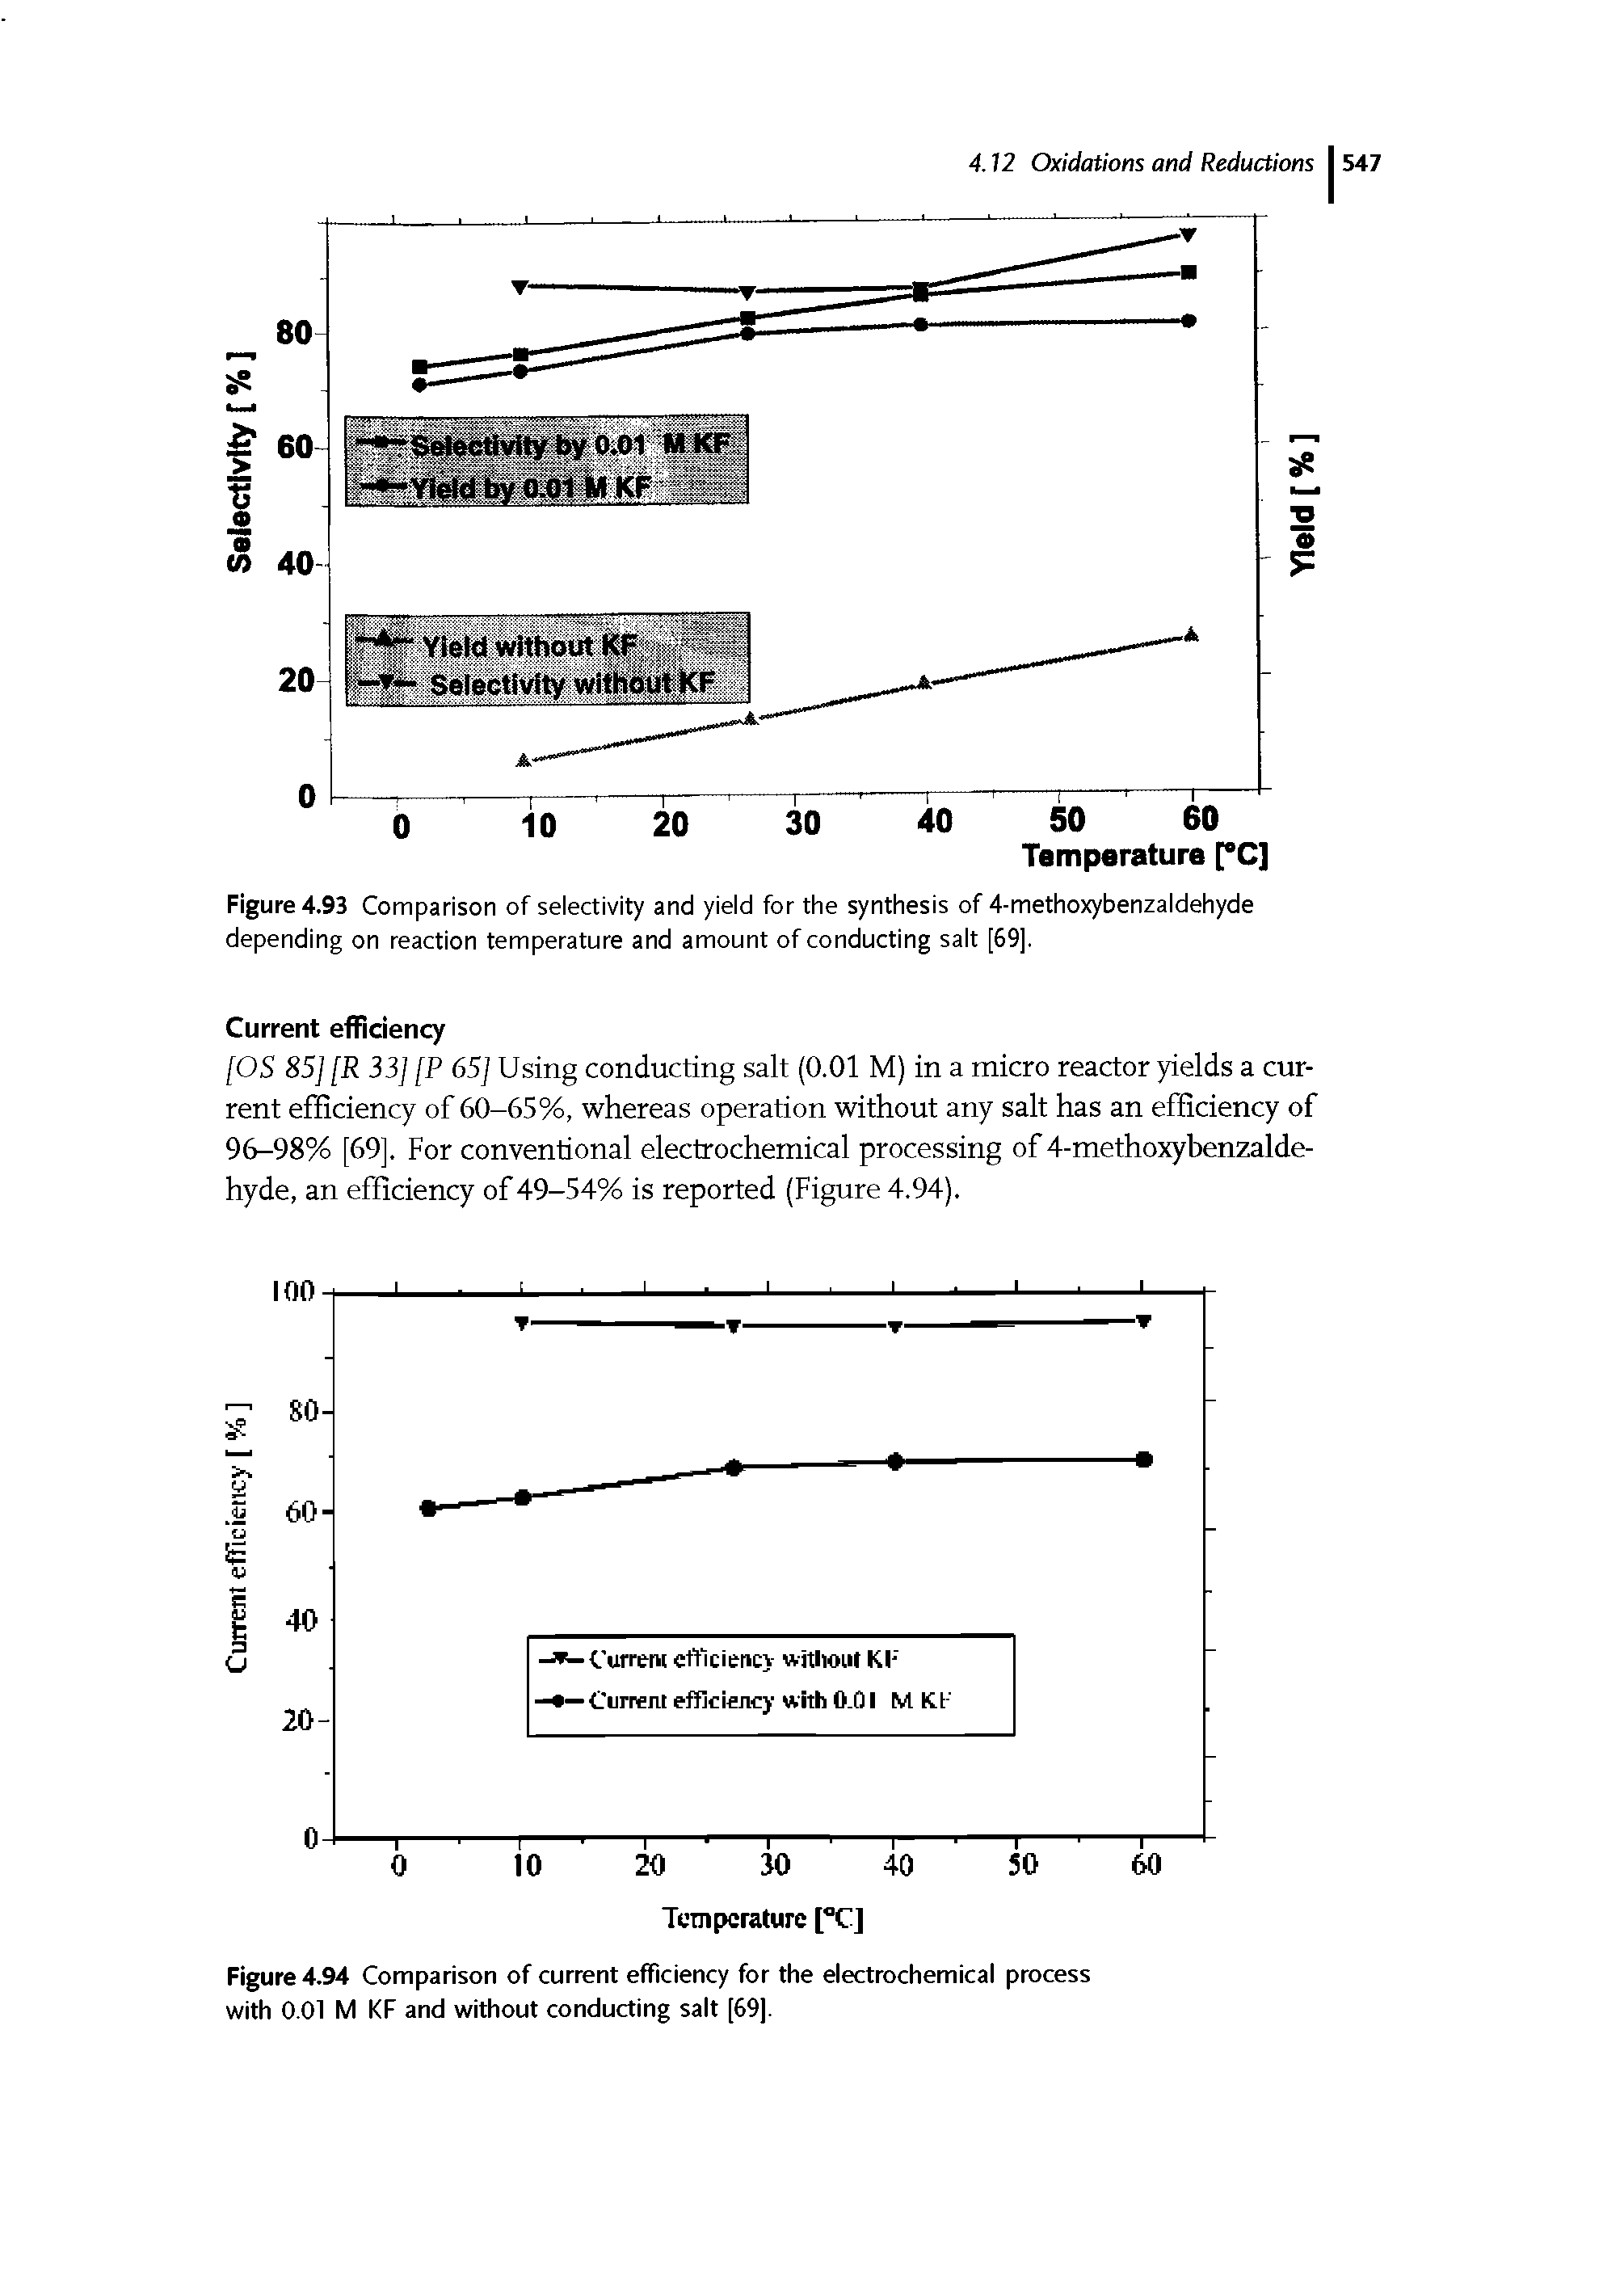 Figure 4.93 Comparison of selectivity and yield for the synthesis of 4-methoxybenzaldehyde depending on reaction temperature and amount of conducting salt [69].